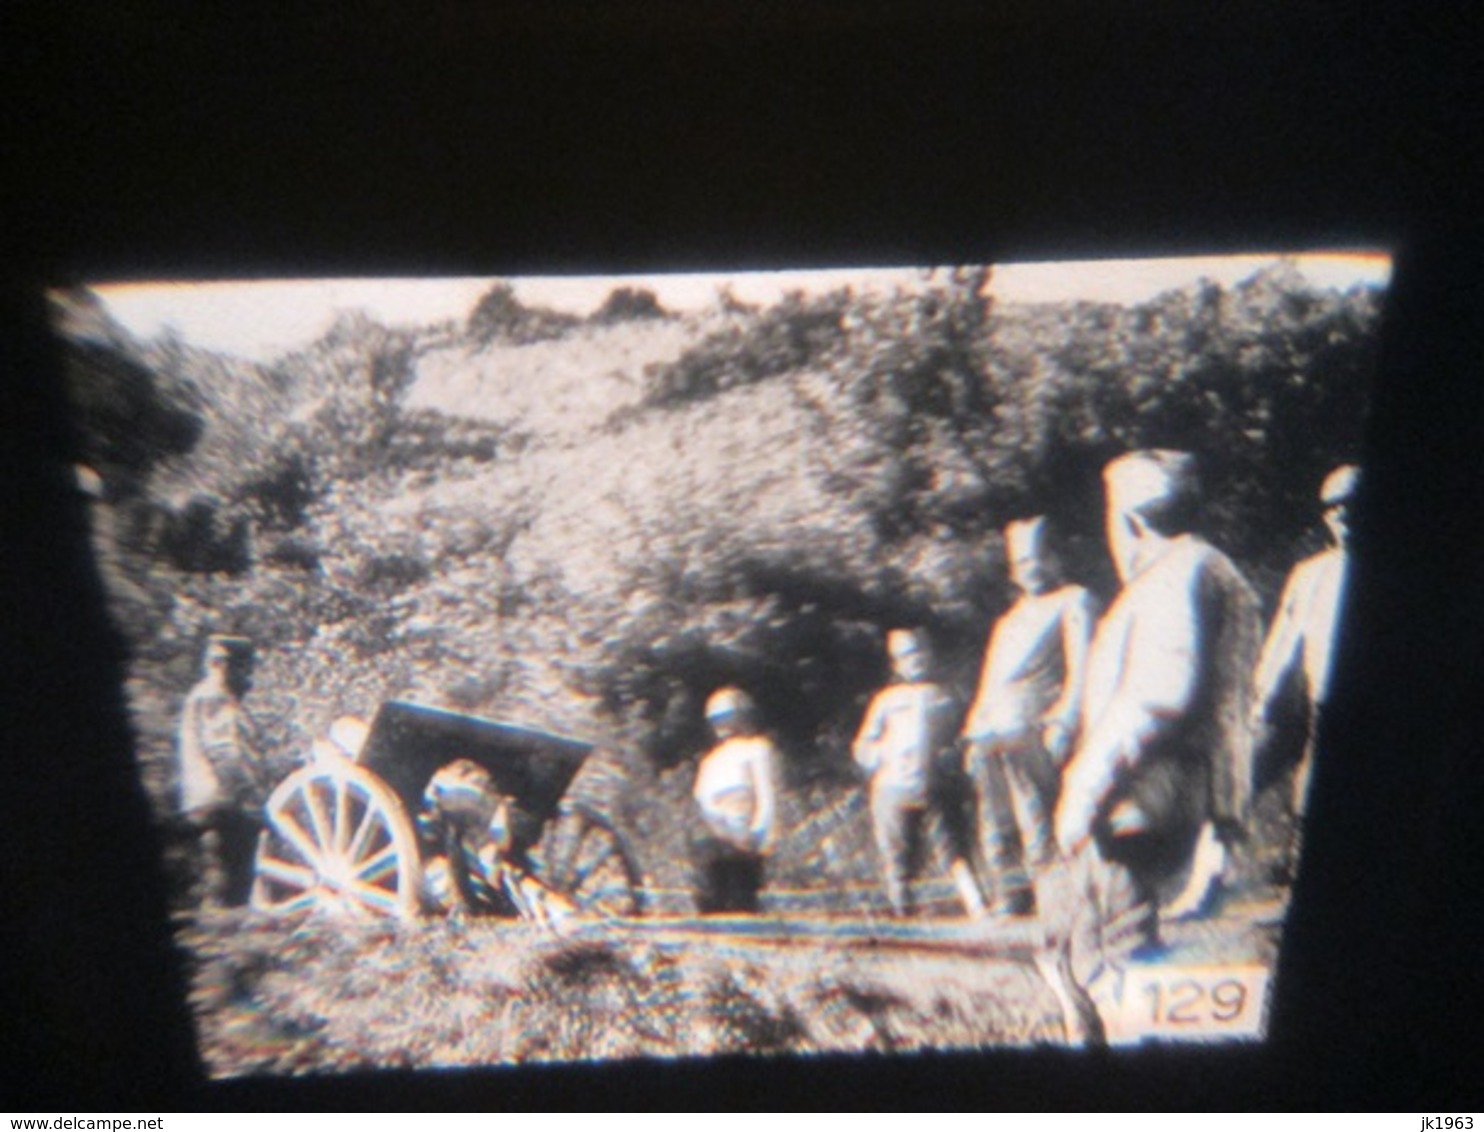 FIRST WORLD WAR, UNKNOWN IMAGES, 128 SLIDES MADE BY STATE ARCHIVE OF JUGOSLAVIA